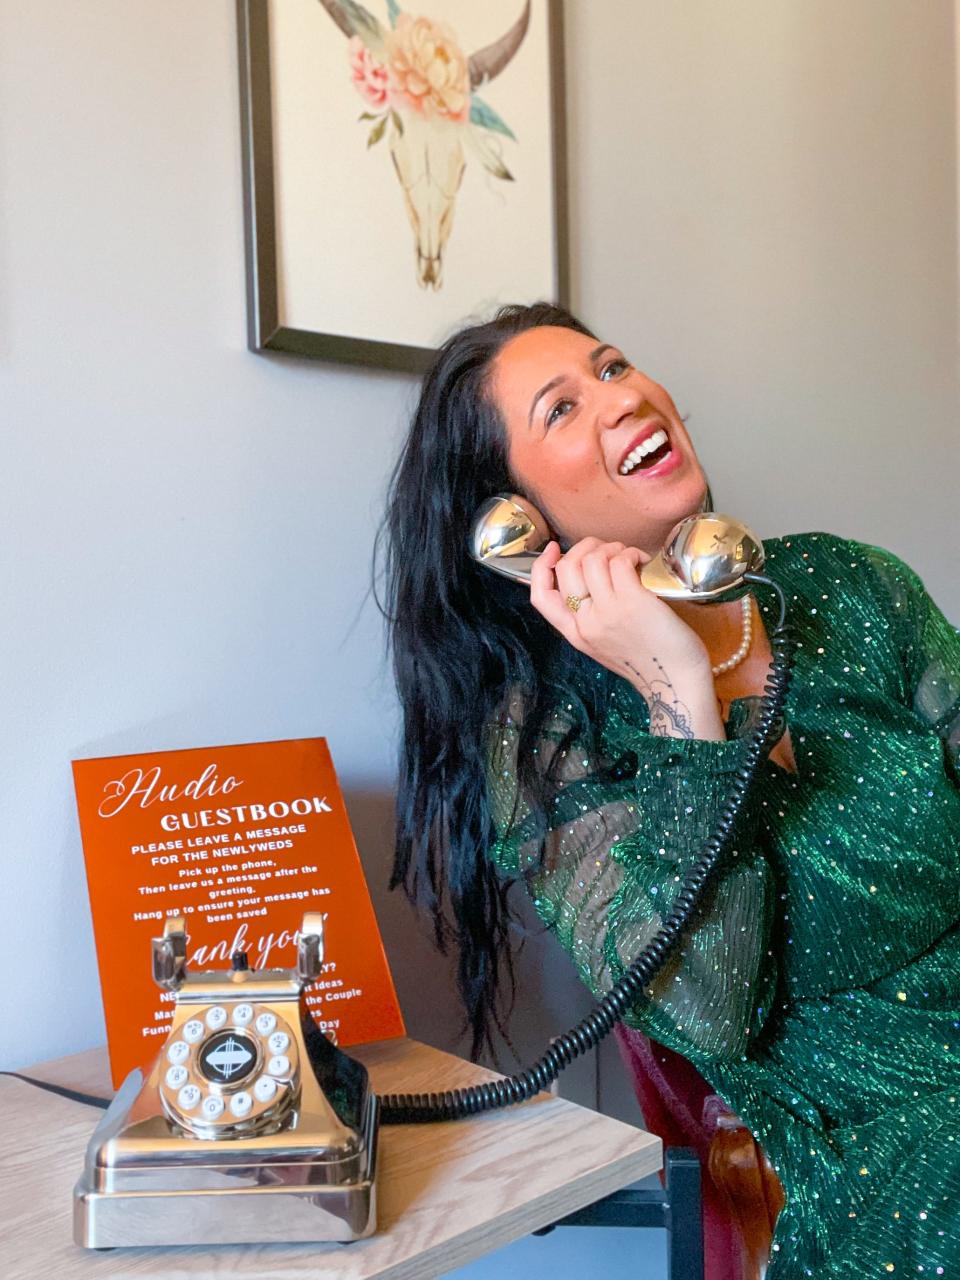 Amanda Irizarry, owner of The Shutter Bird Photo Booth, is offering a new trend in guestbooks, the Audio Guestbook Phone. “Sometimes people will just book the phone. If it is within 40 miles of Knoxville I will drop it off before and pick it up after the event. It's so easy,” she said.